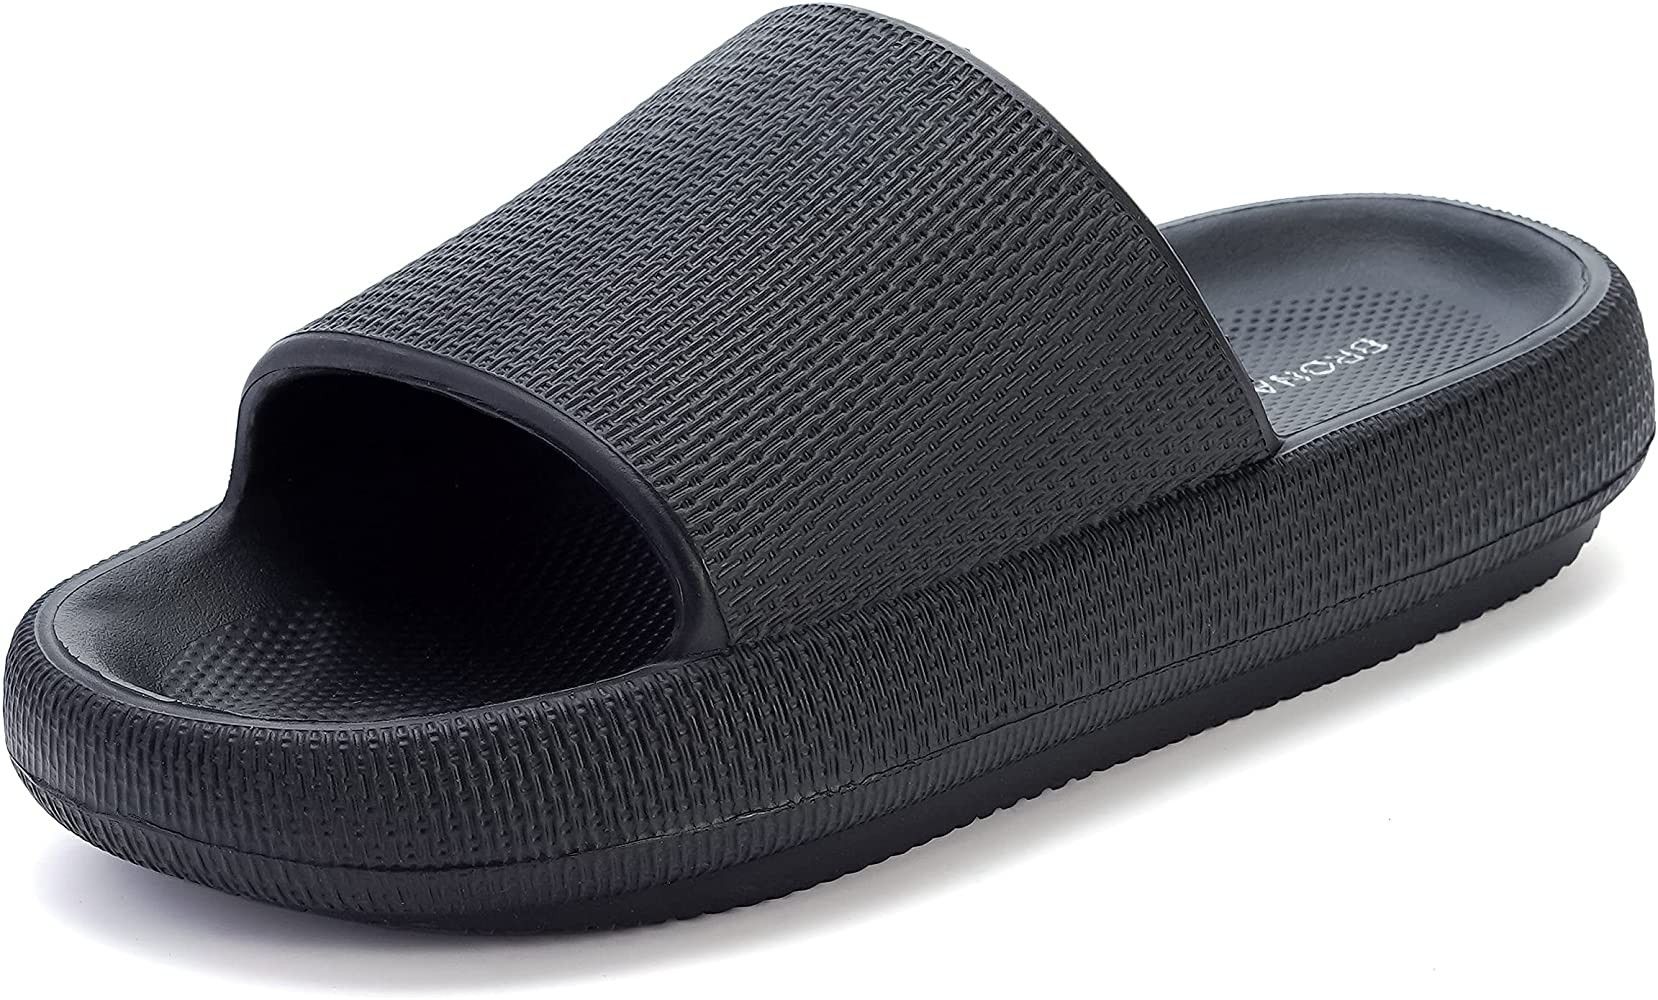 BRONAX Cloud Slides for Women and Men | Shower Slippers Bathroom Sandals | Extremely Comfy | Cushion | Amazon (US)